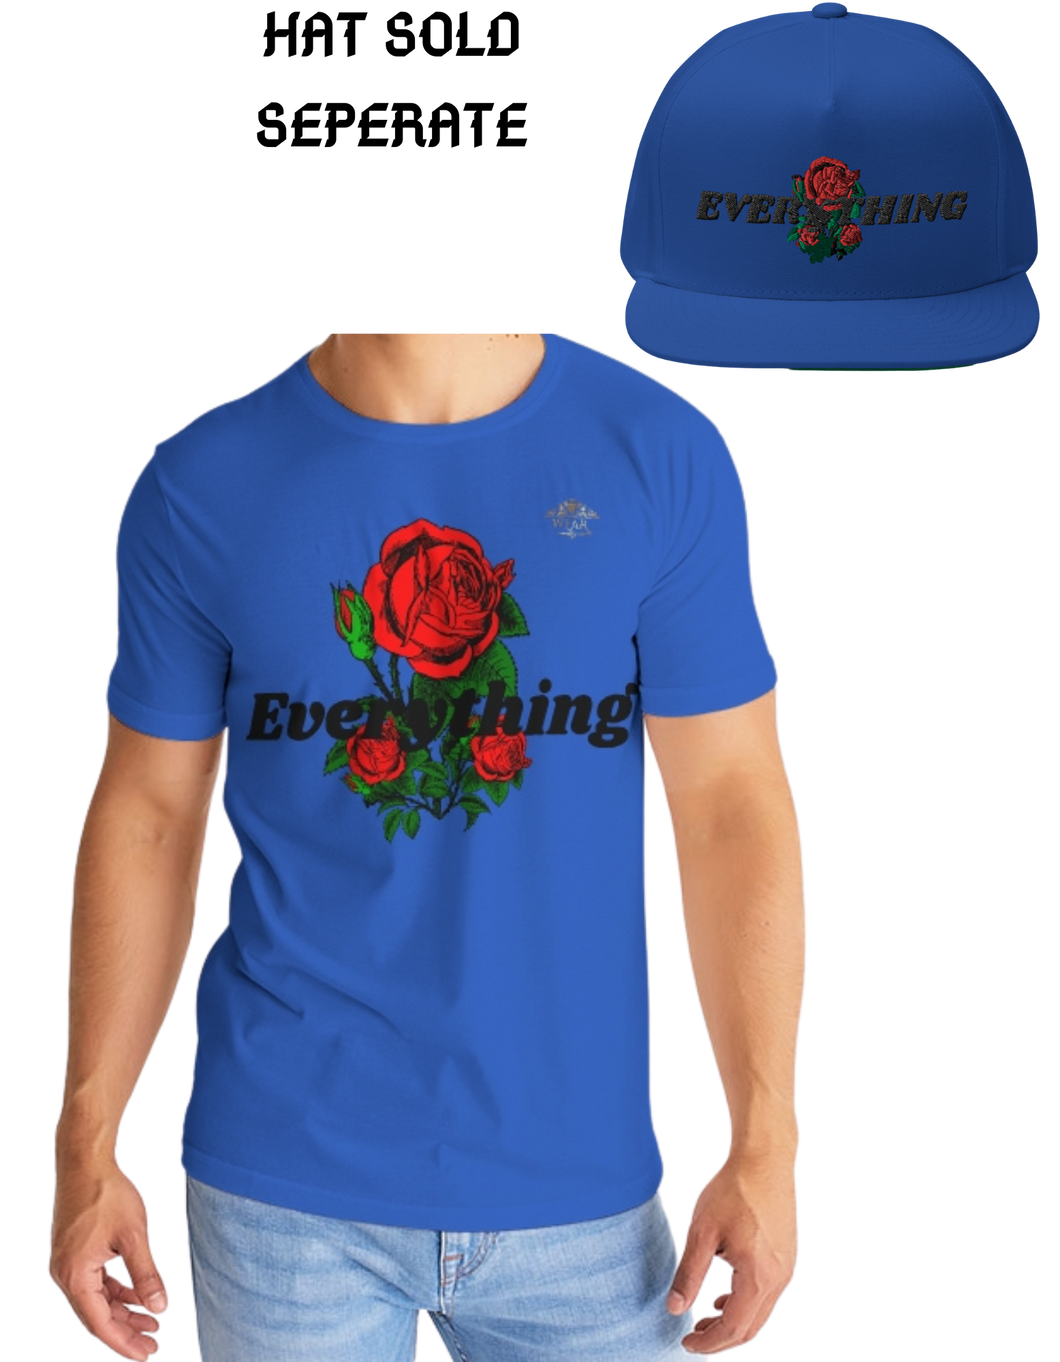 EVERYTHING ROSES 3.0 (T-SHIRT) - BLUE/BLACK Men's All-Over Print Tee